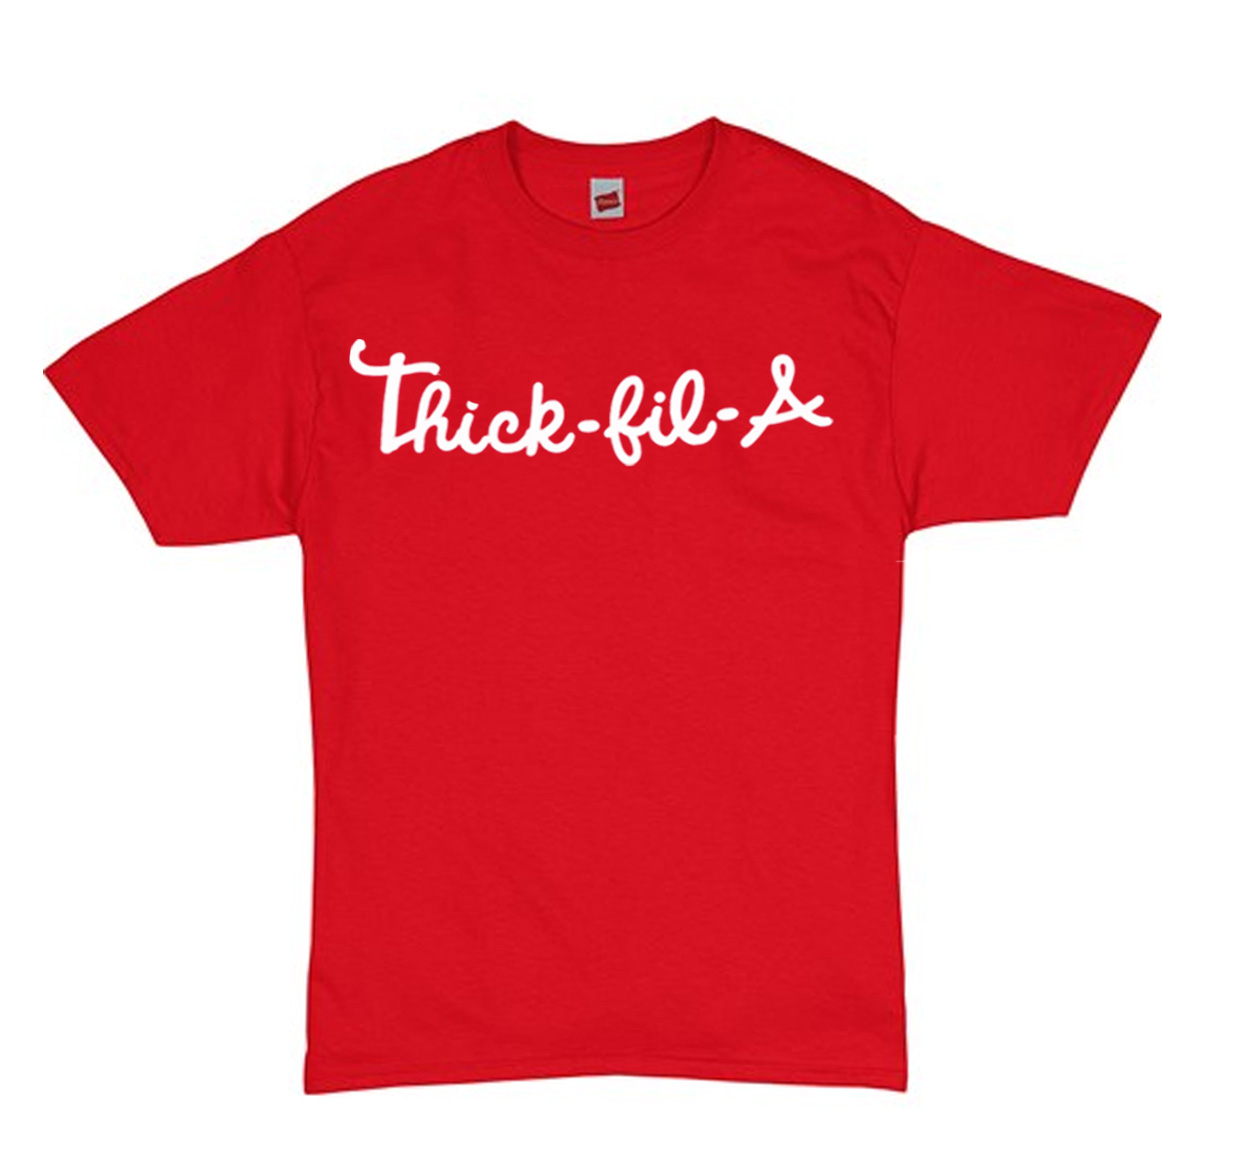 THick FIl A Shirt For Women and Men